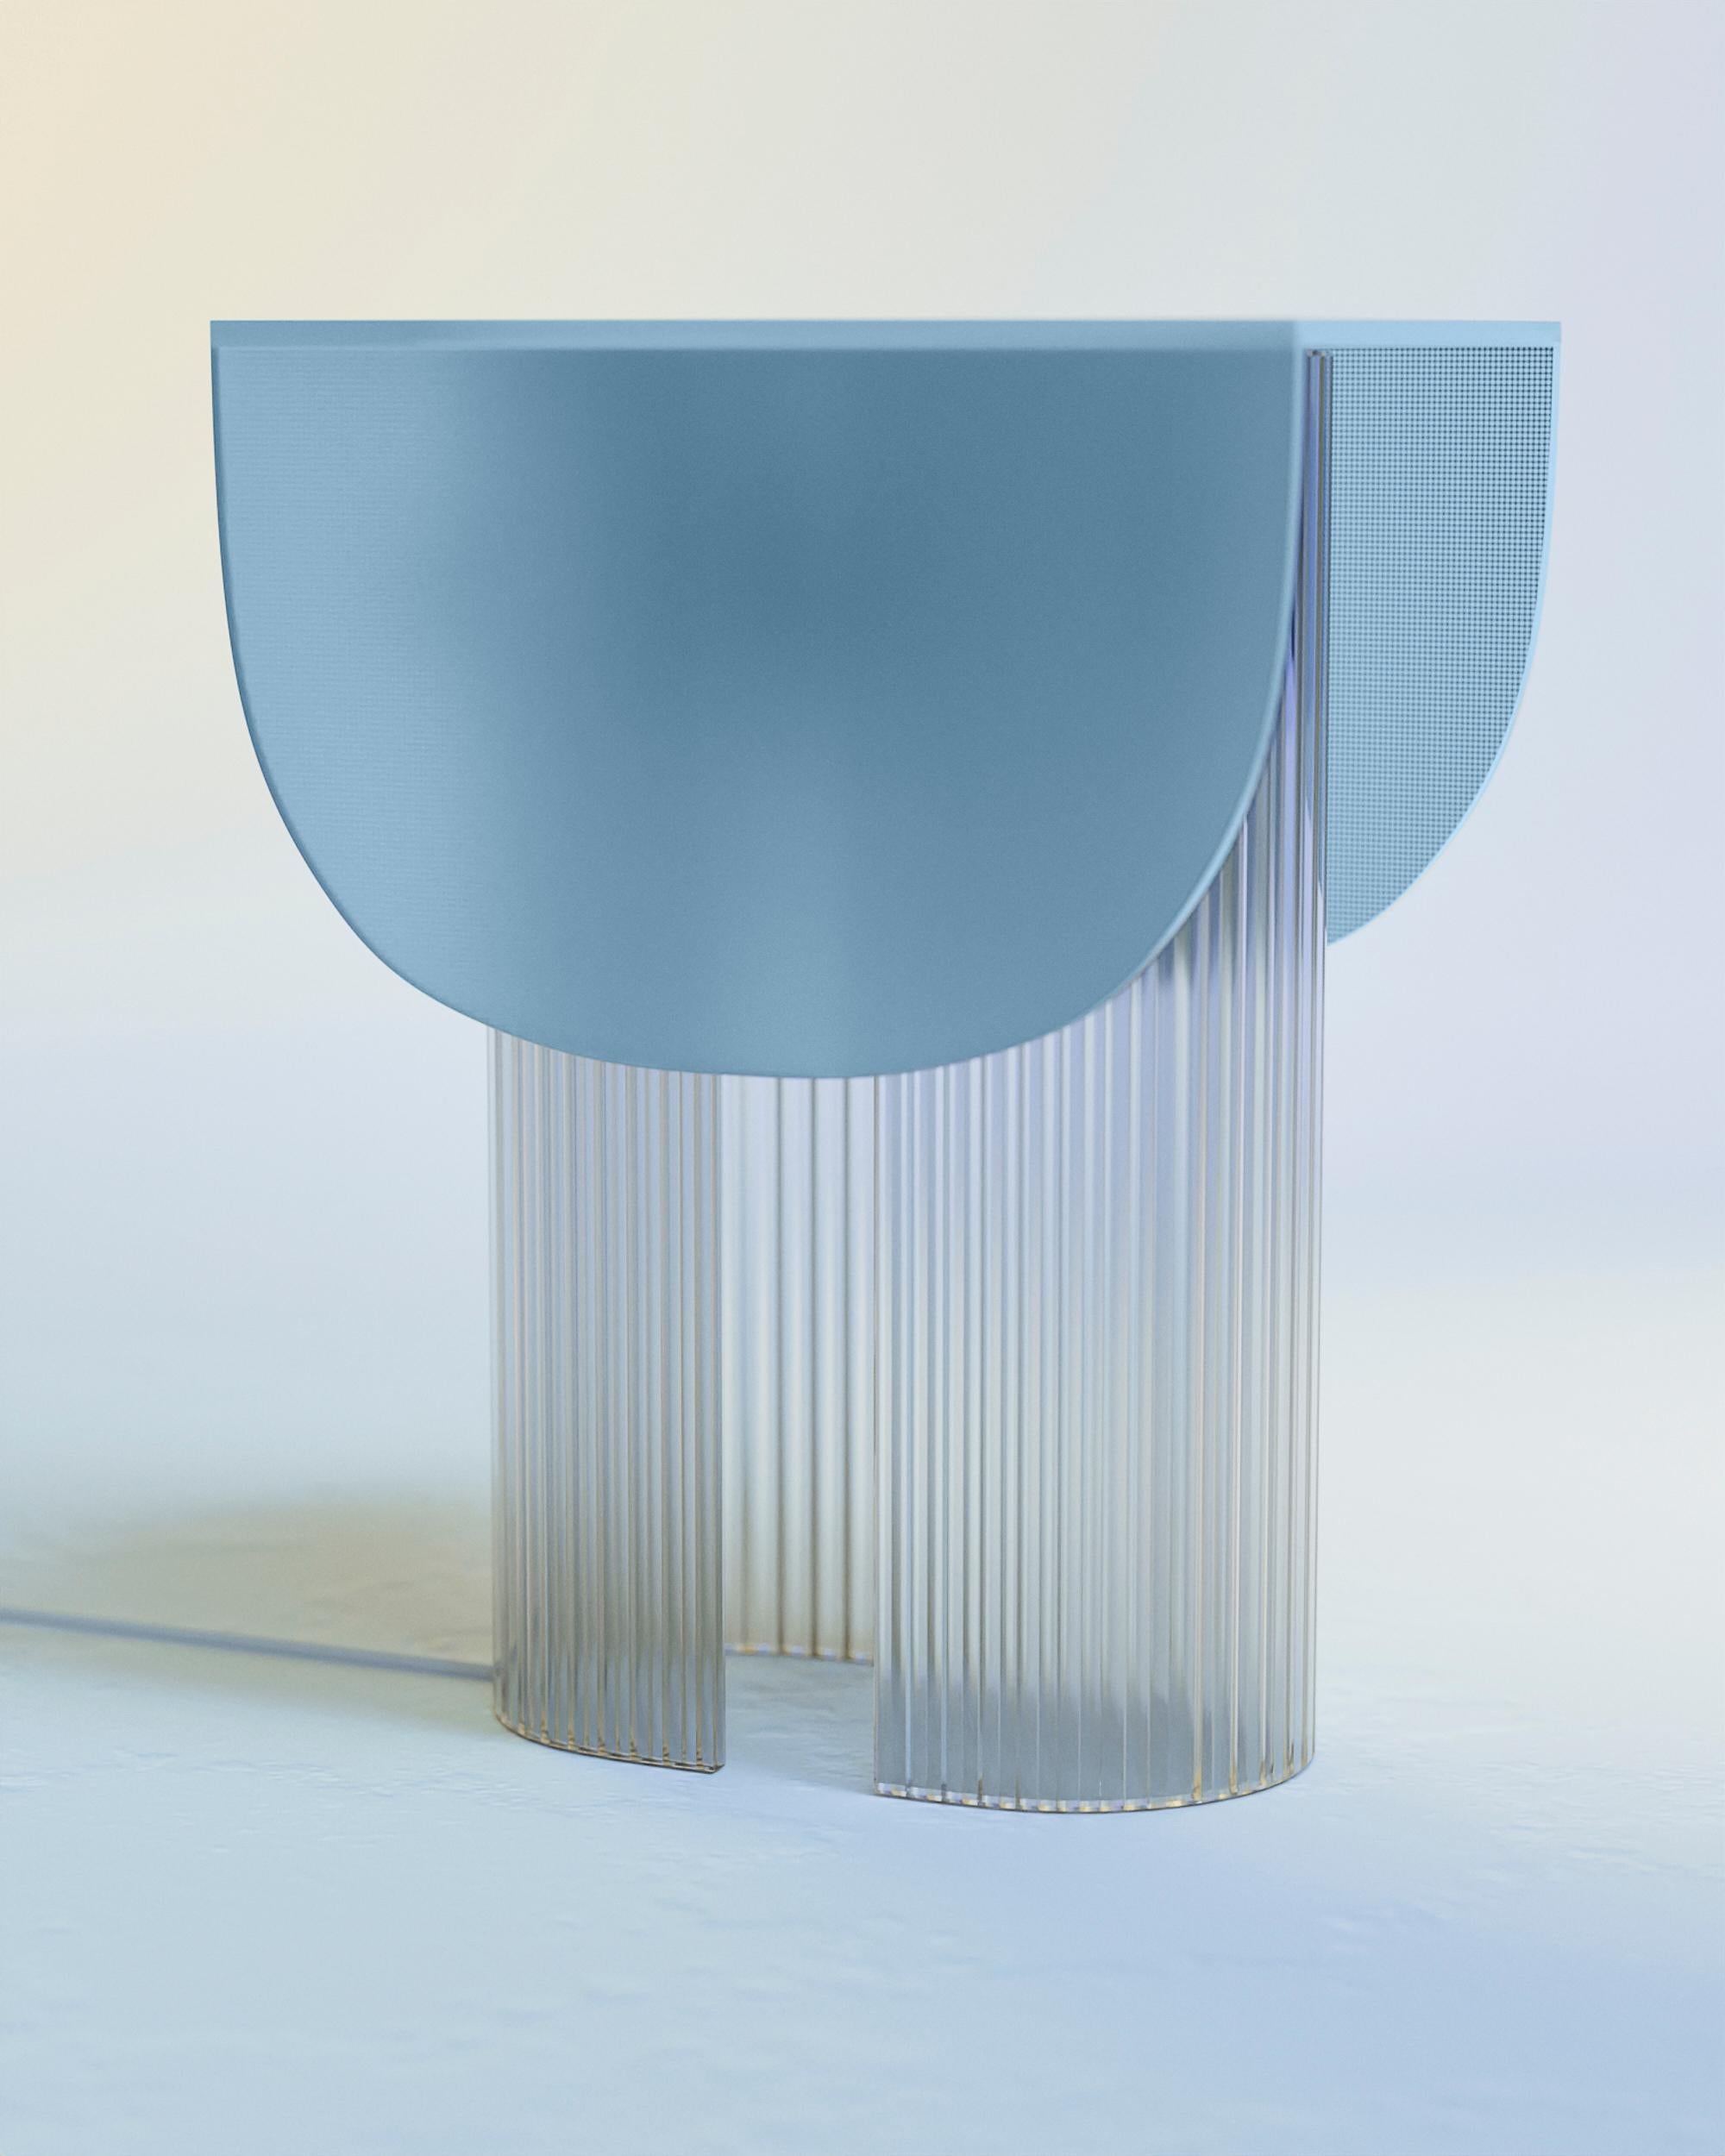 Ice Blue Helia Table Lamp by Glass Variations
Dimensions: W 22 x D 31 x H 40 cm
Materials: Glass.

With this 100% glass table lamp Bina Baitel celebrates light and sun. Its curved patterned glass structure and the satin finished glass cap diffuse a